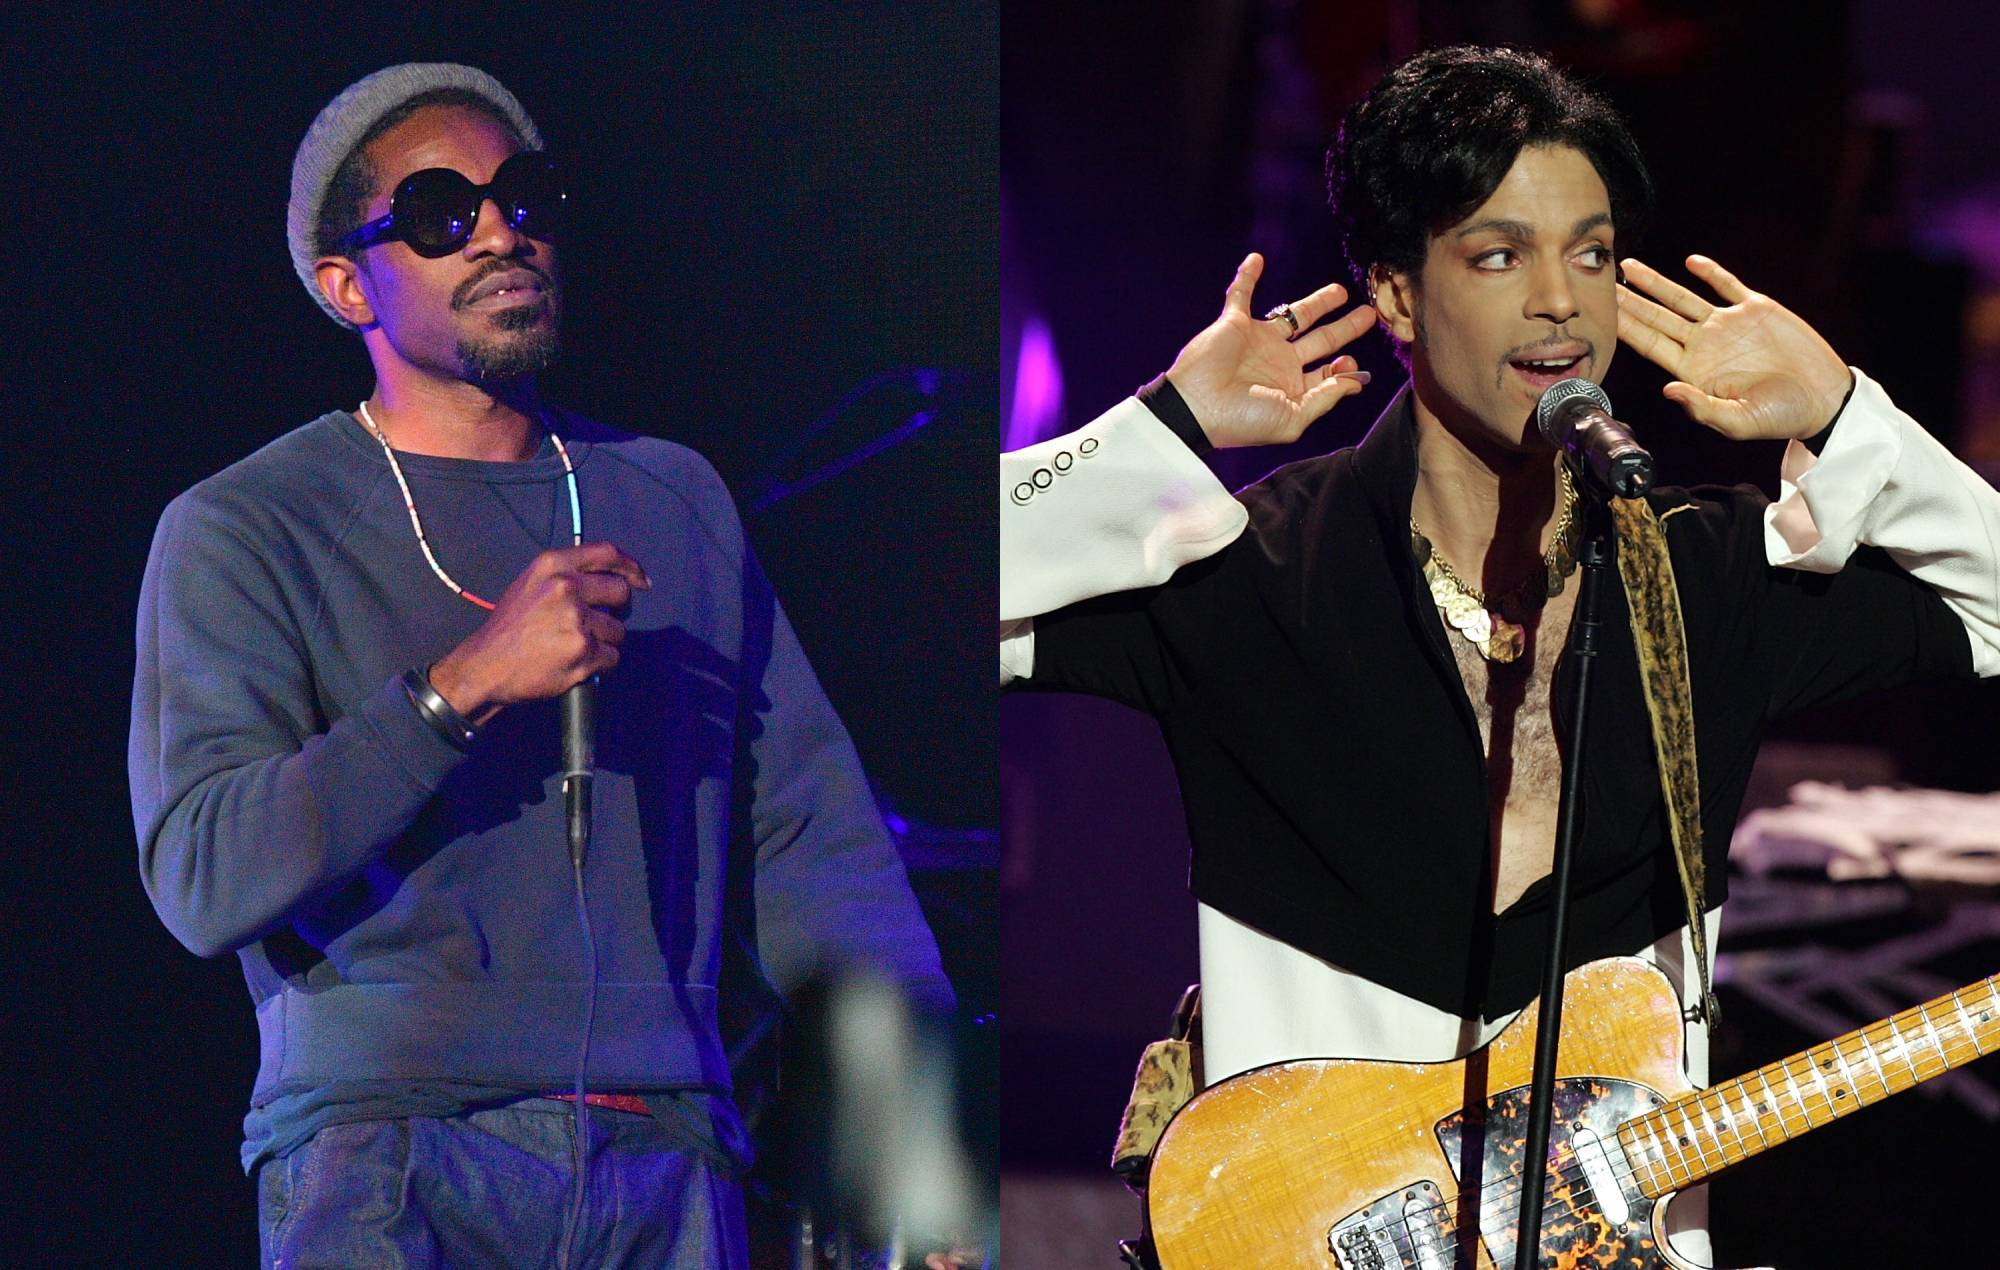 Prince once called André 3000 to tell him what went wrong with OutKast’s reunion performance